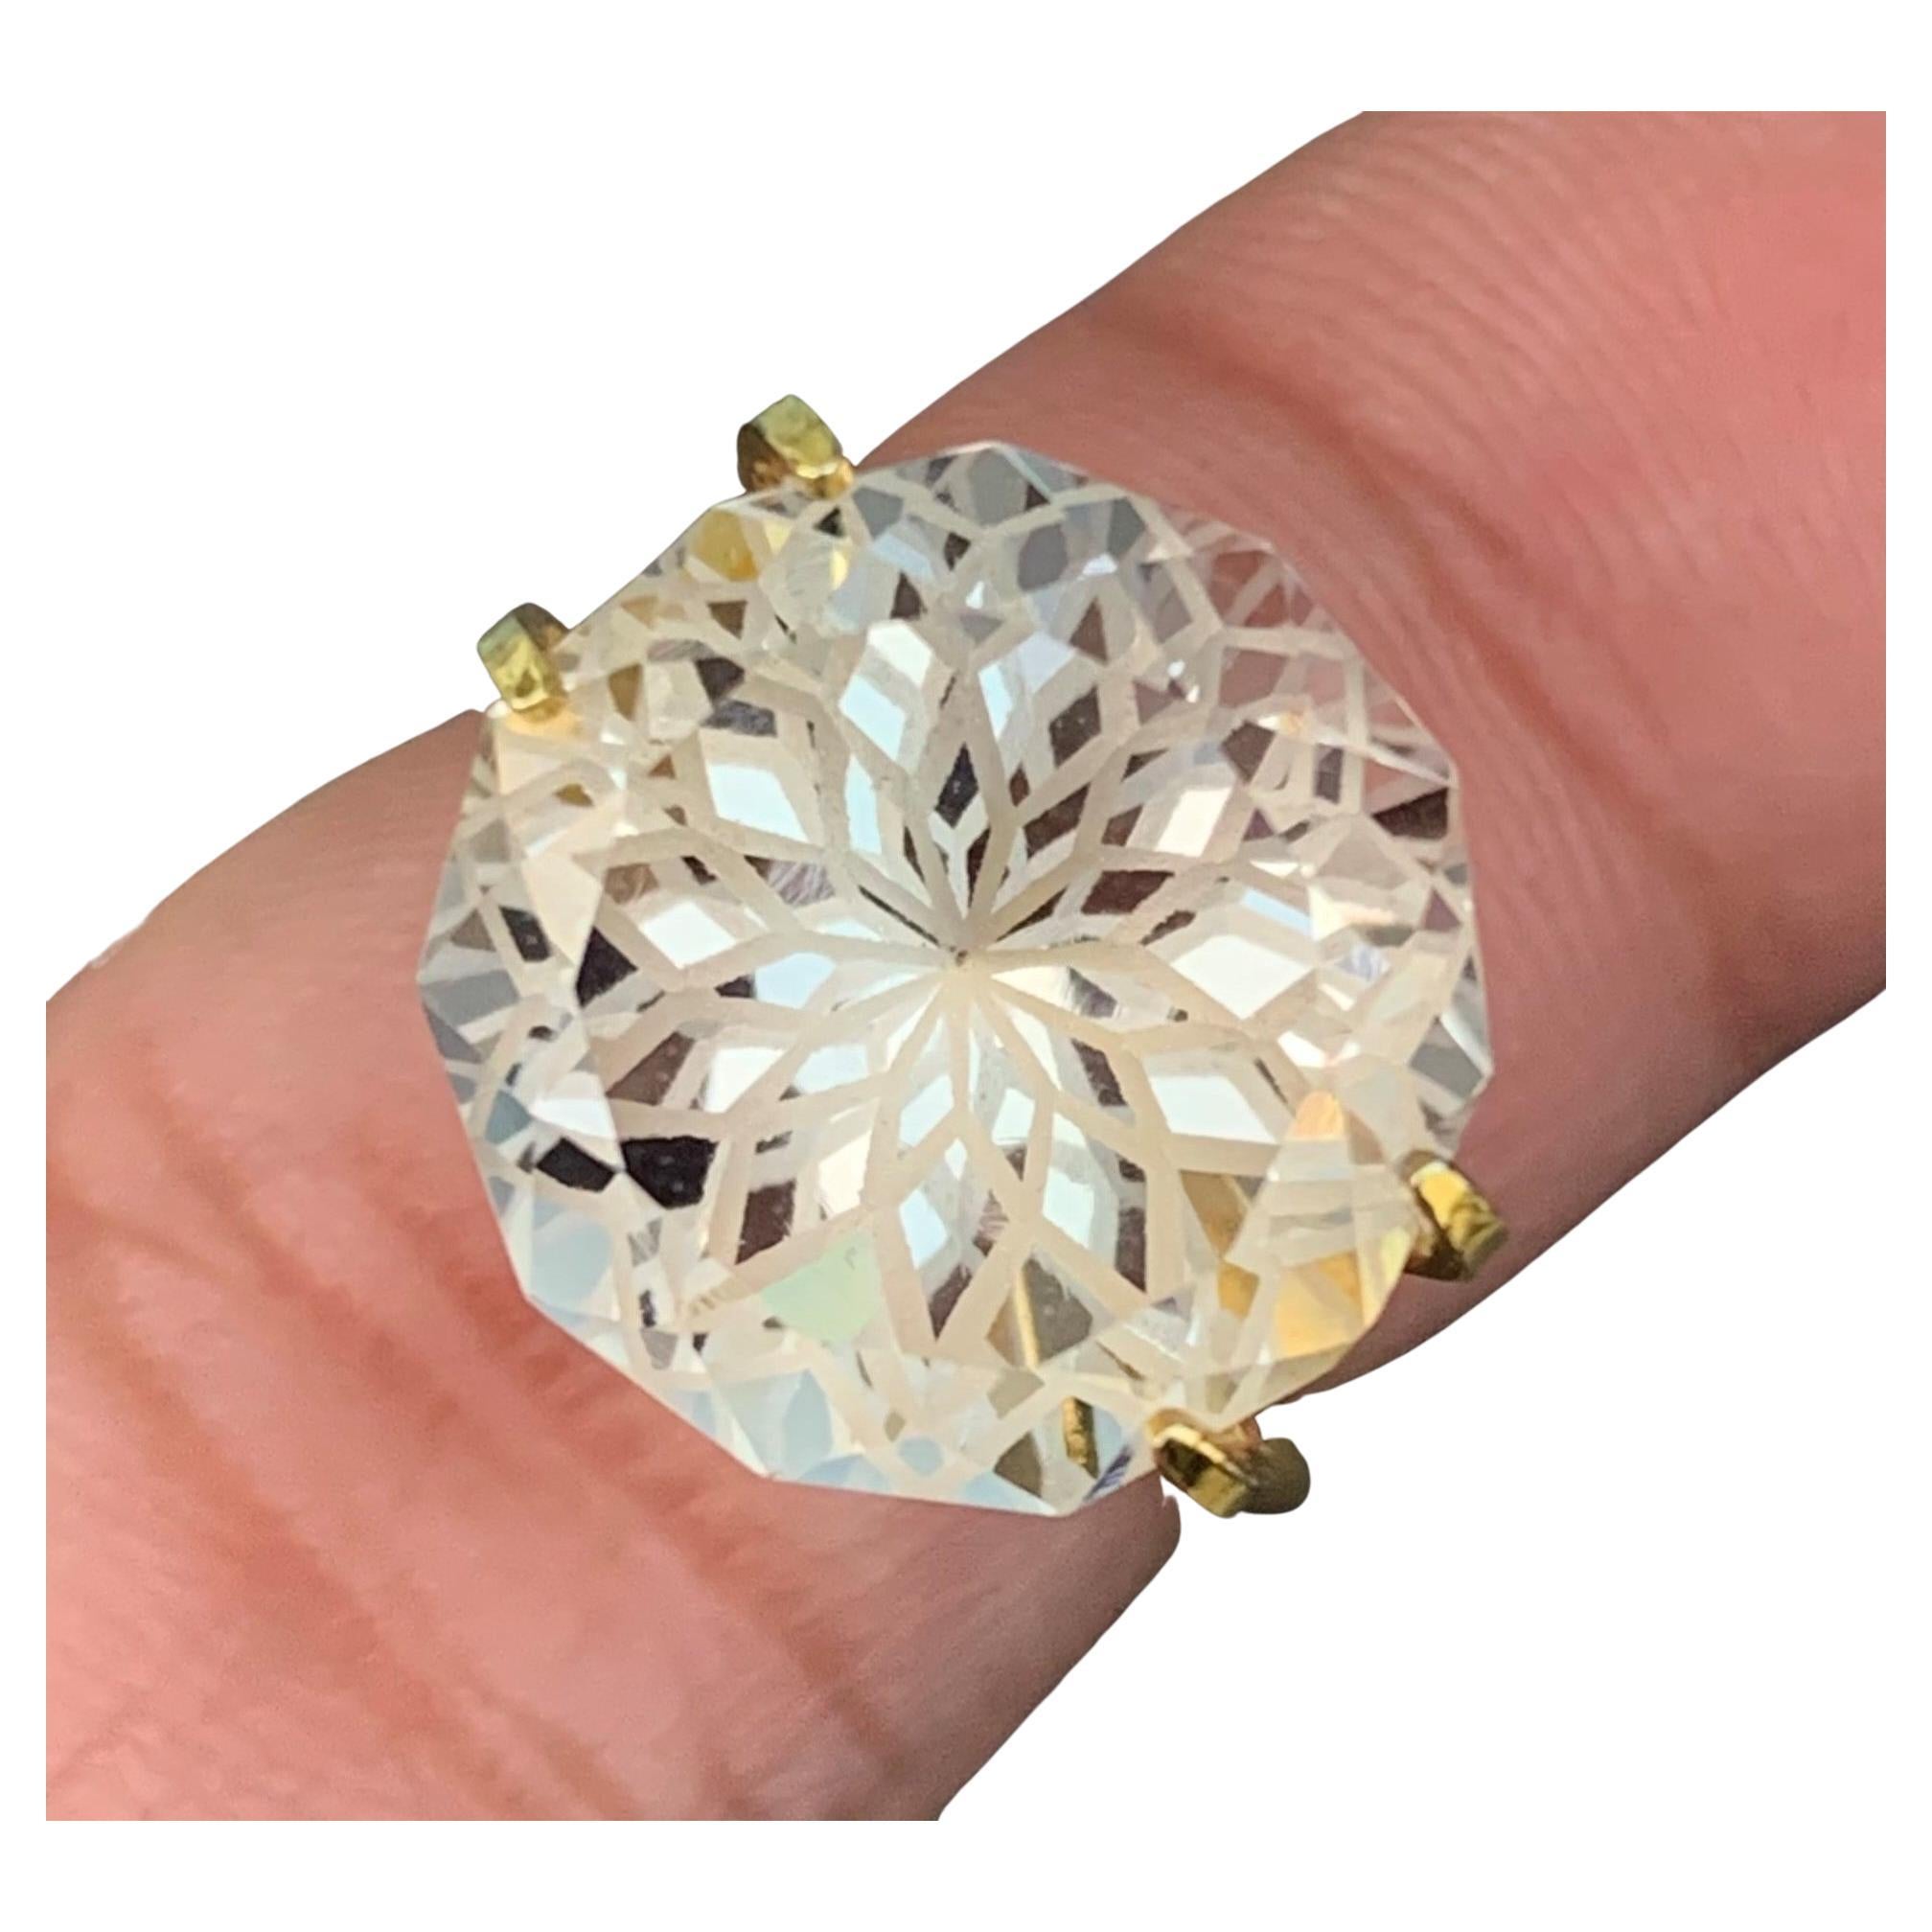 Natural Golden Loose Flower Cut Topaz 13.25 Carat For Jewelry Making